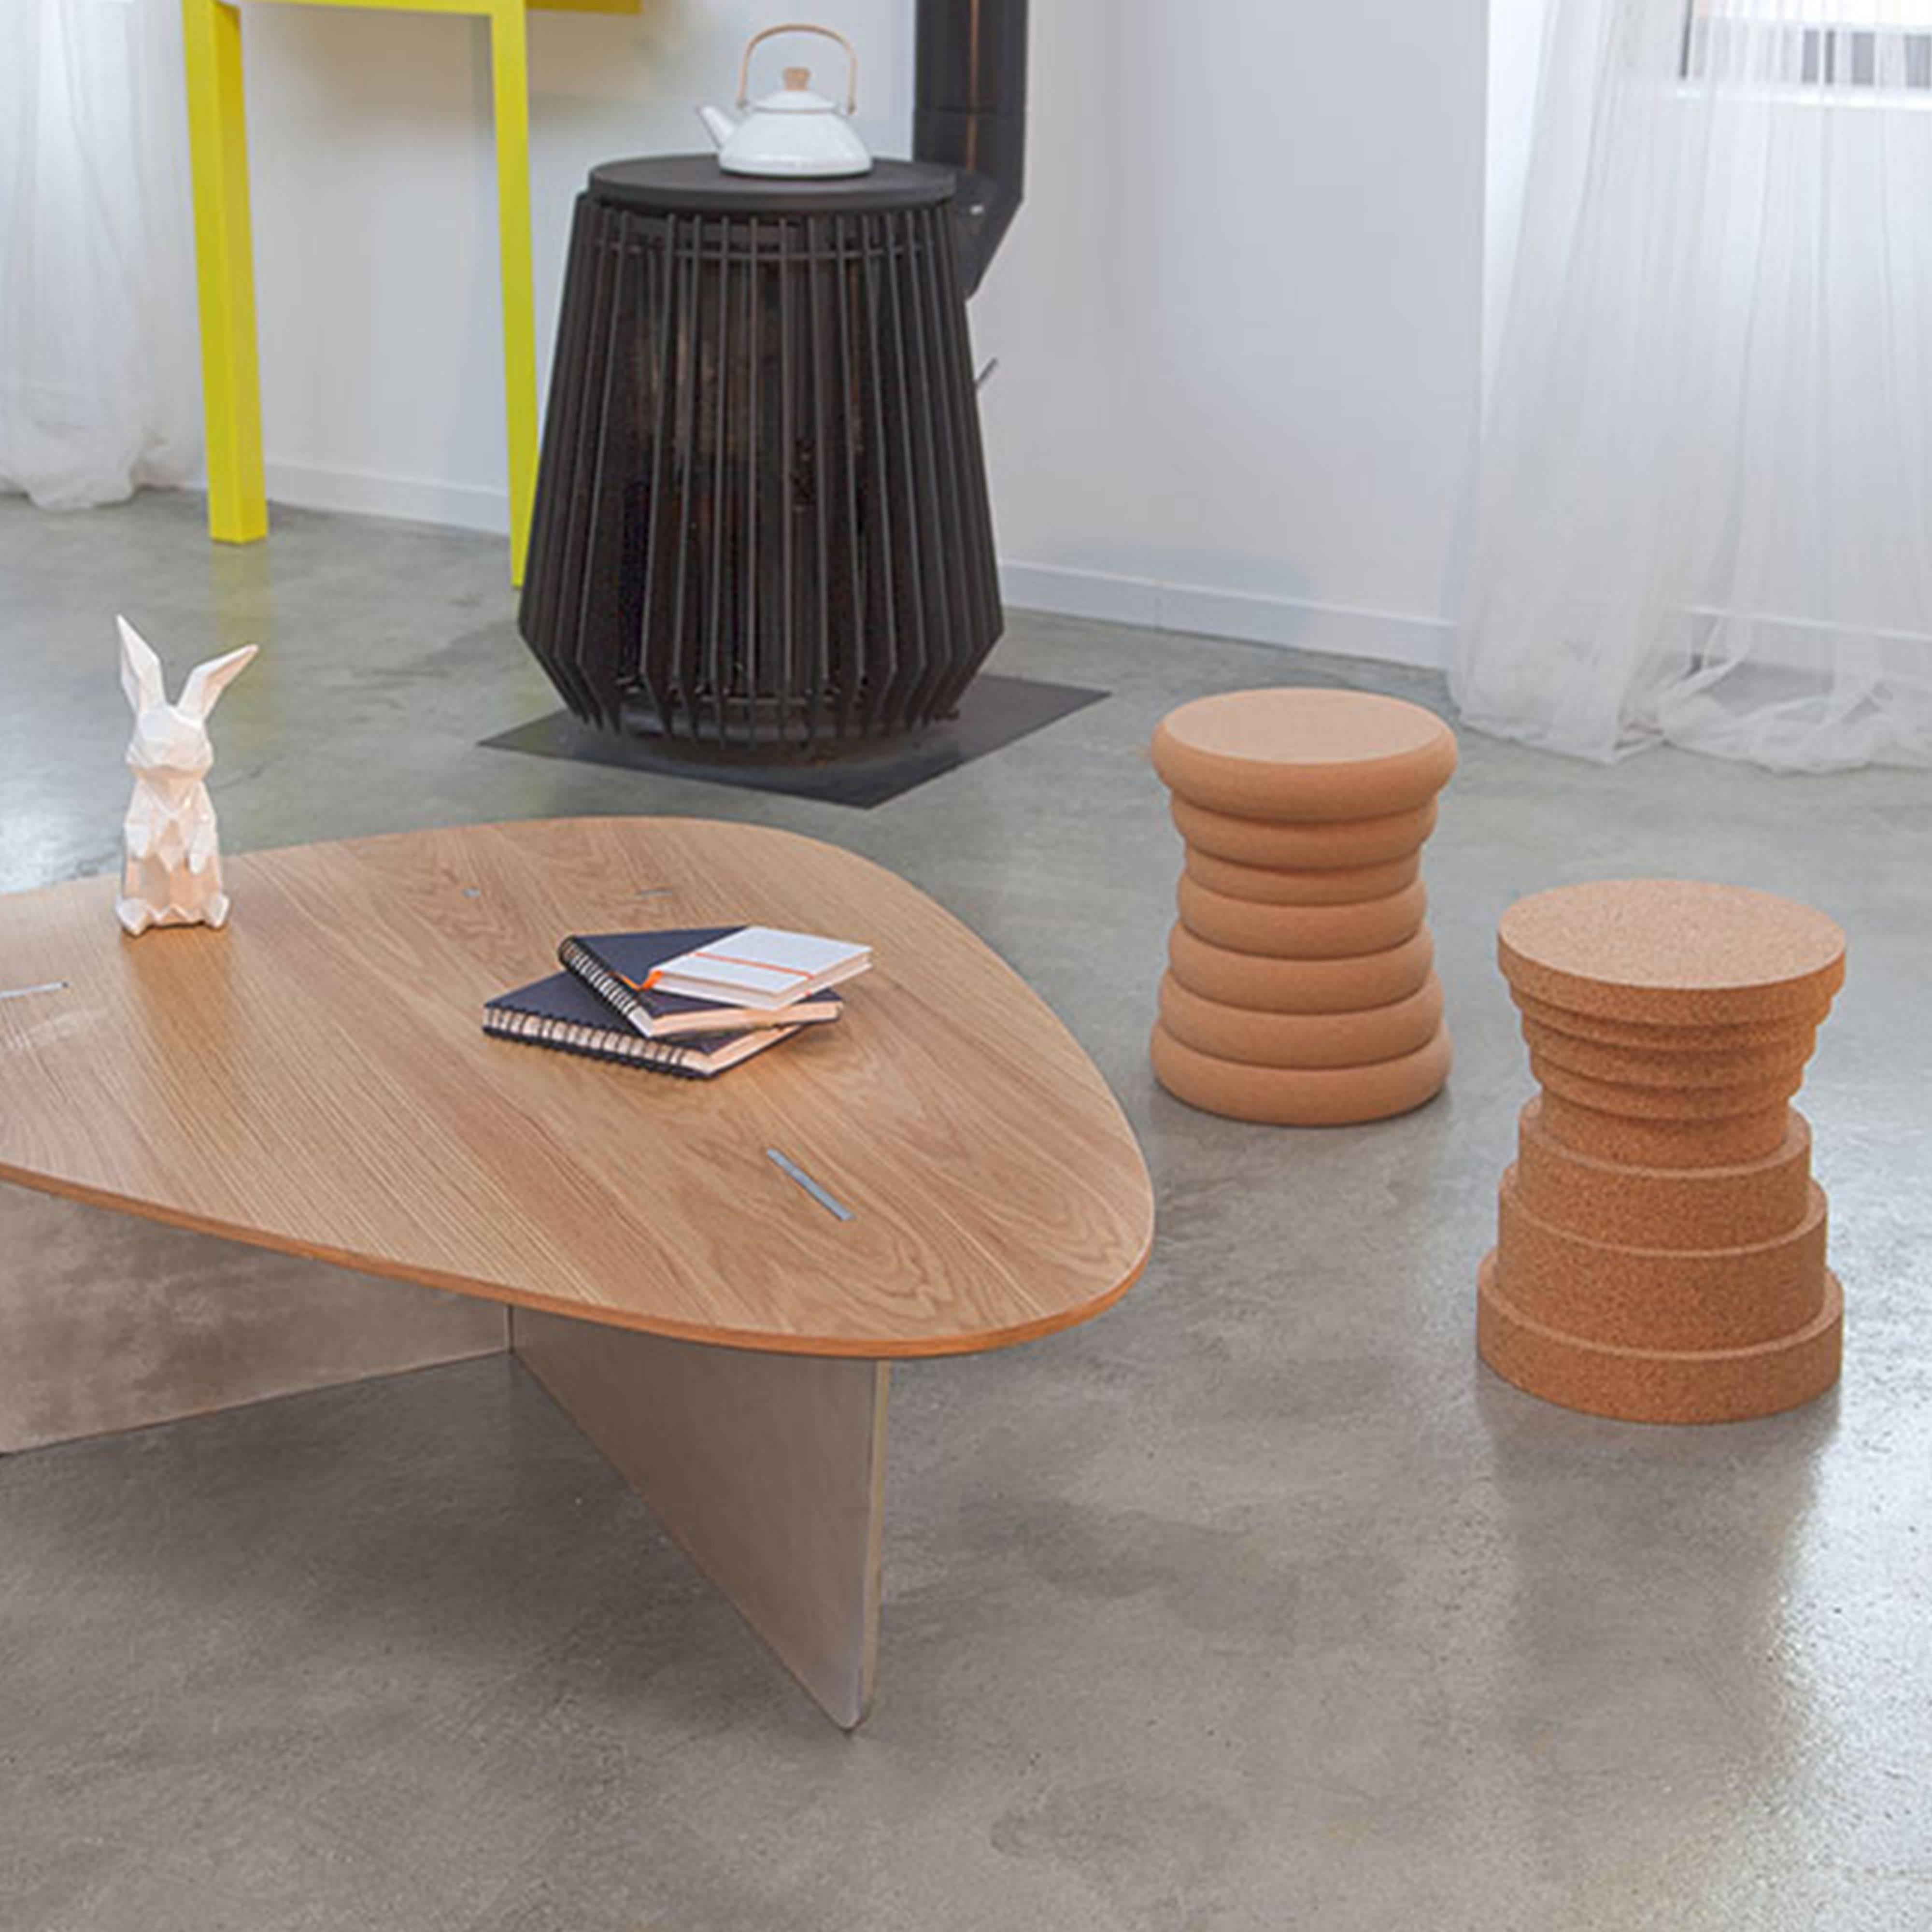 Woodwork Modern stool by Philippe Cramer, in cork, with smooth edge created by hand For Sale